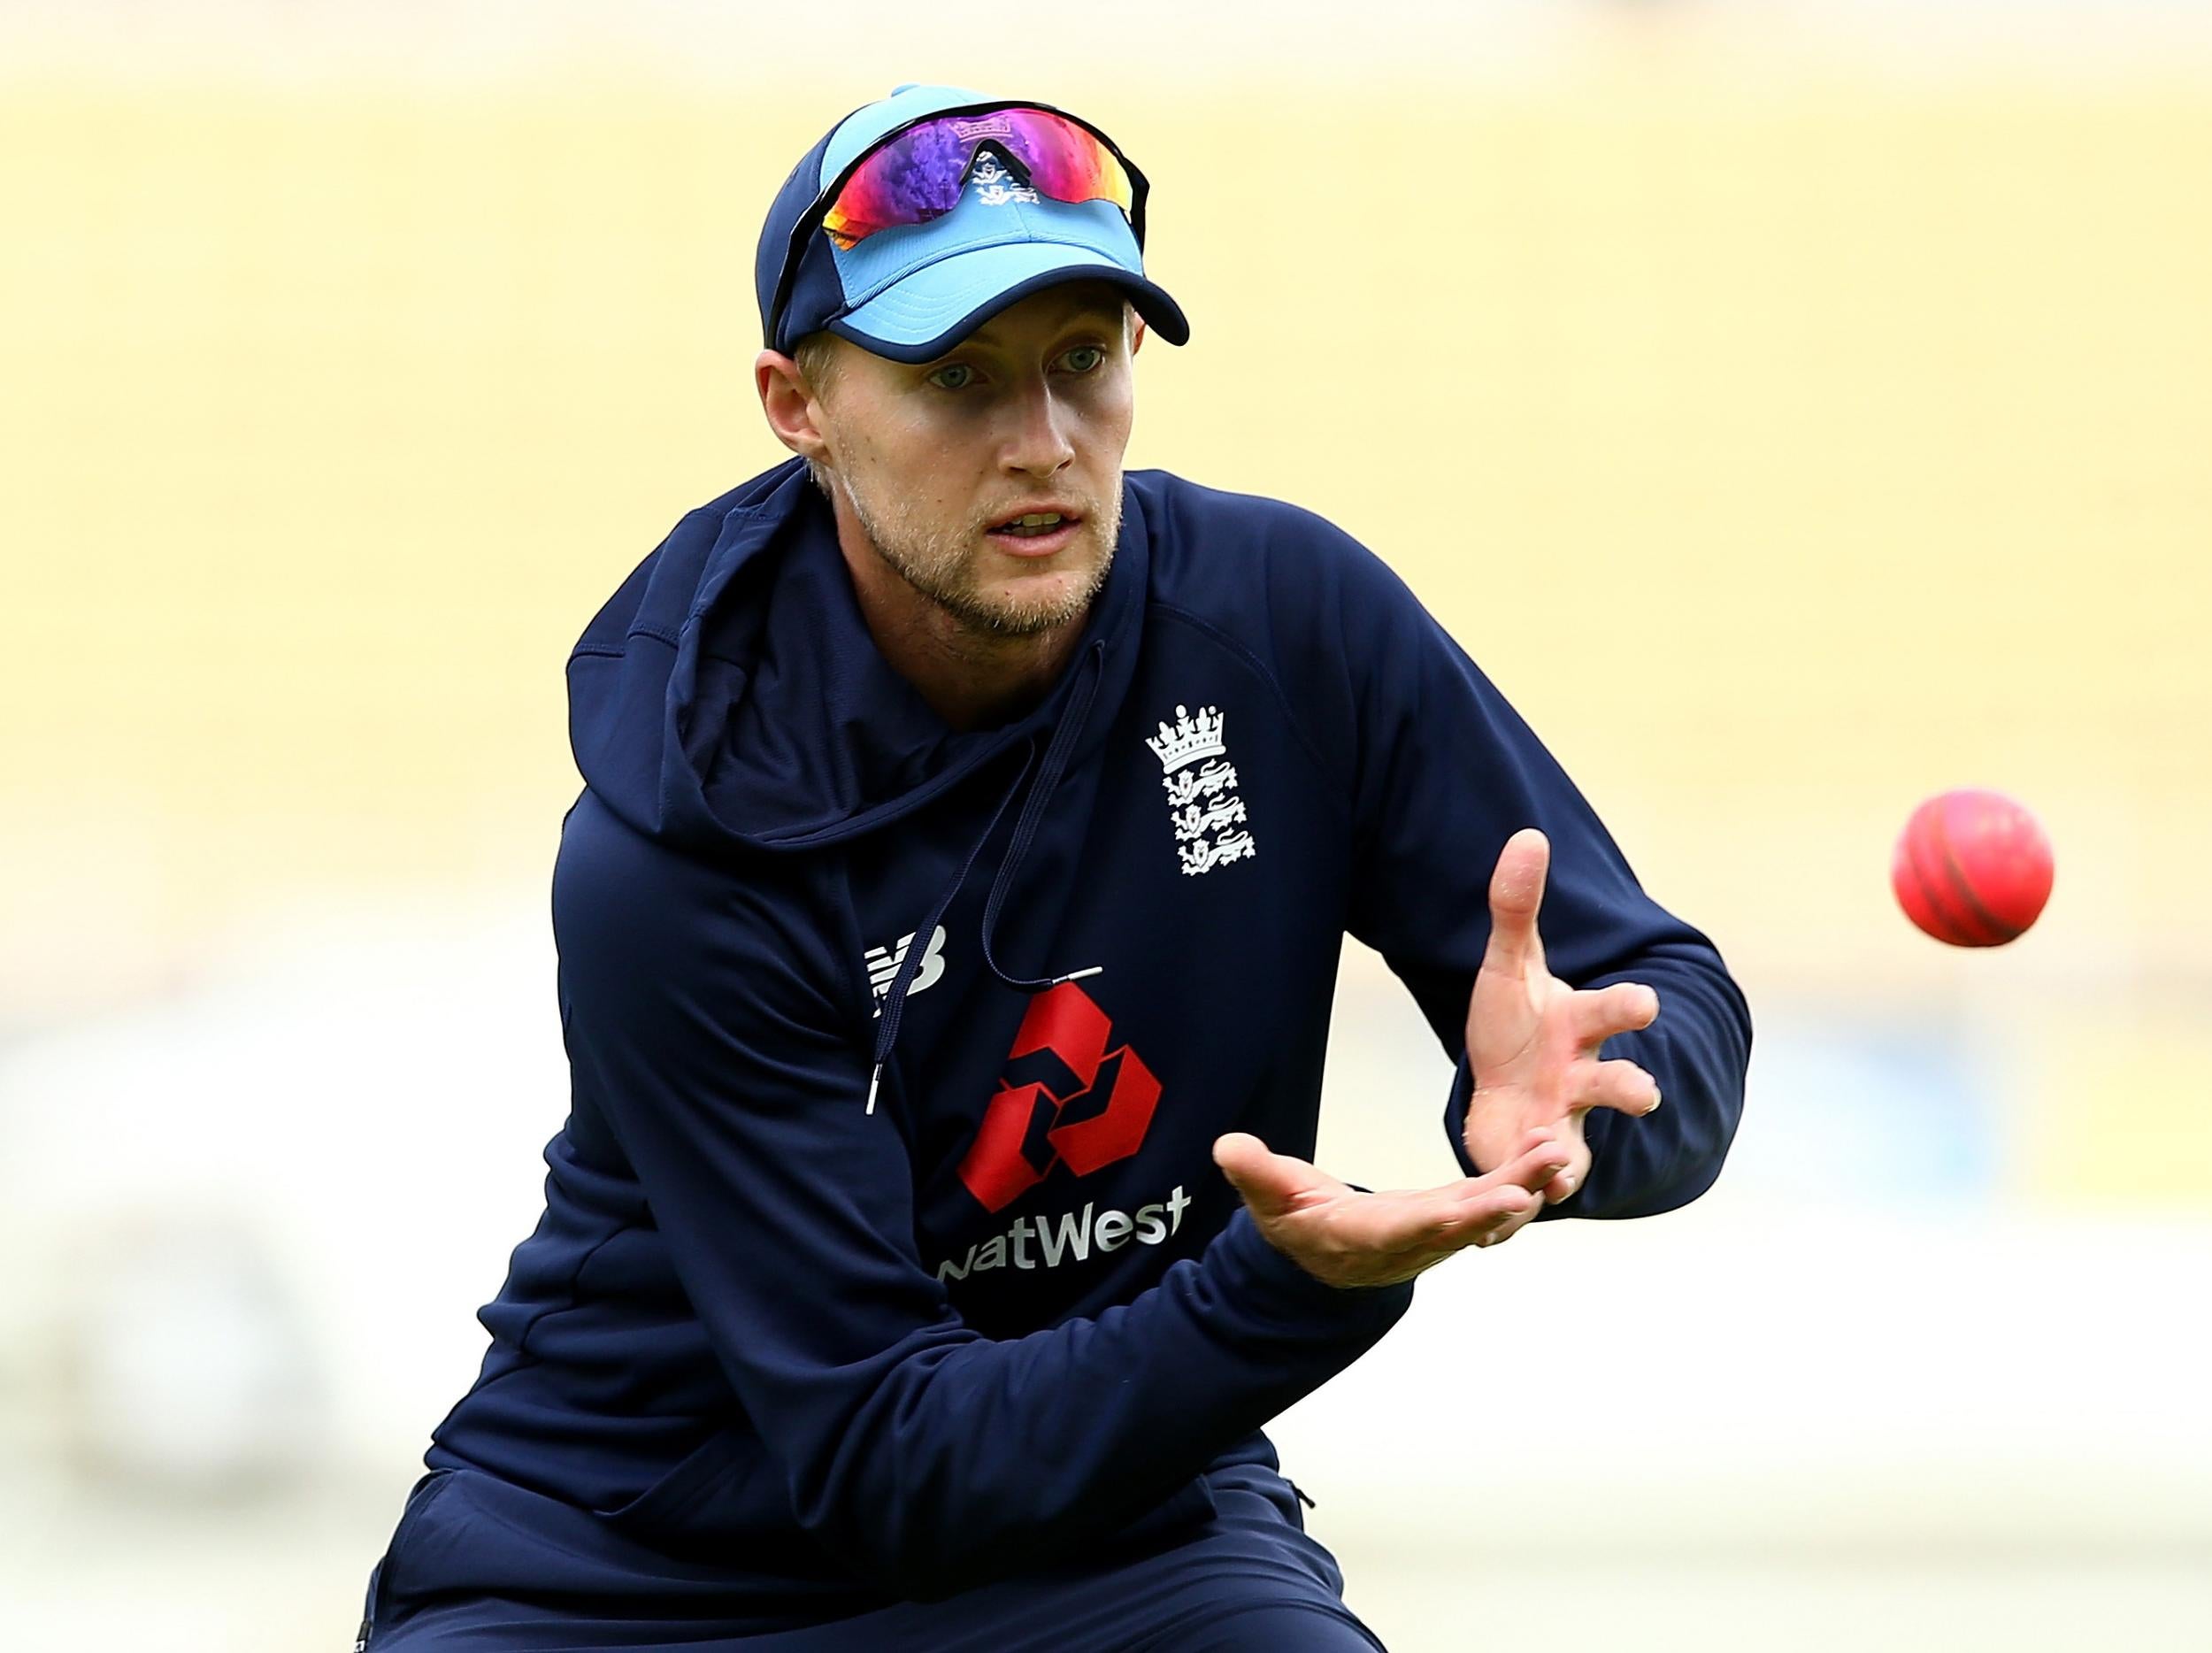 England captain Joe Root believes his players should adapt well to the rhythm of day-night Test cricket